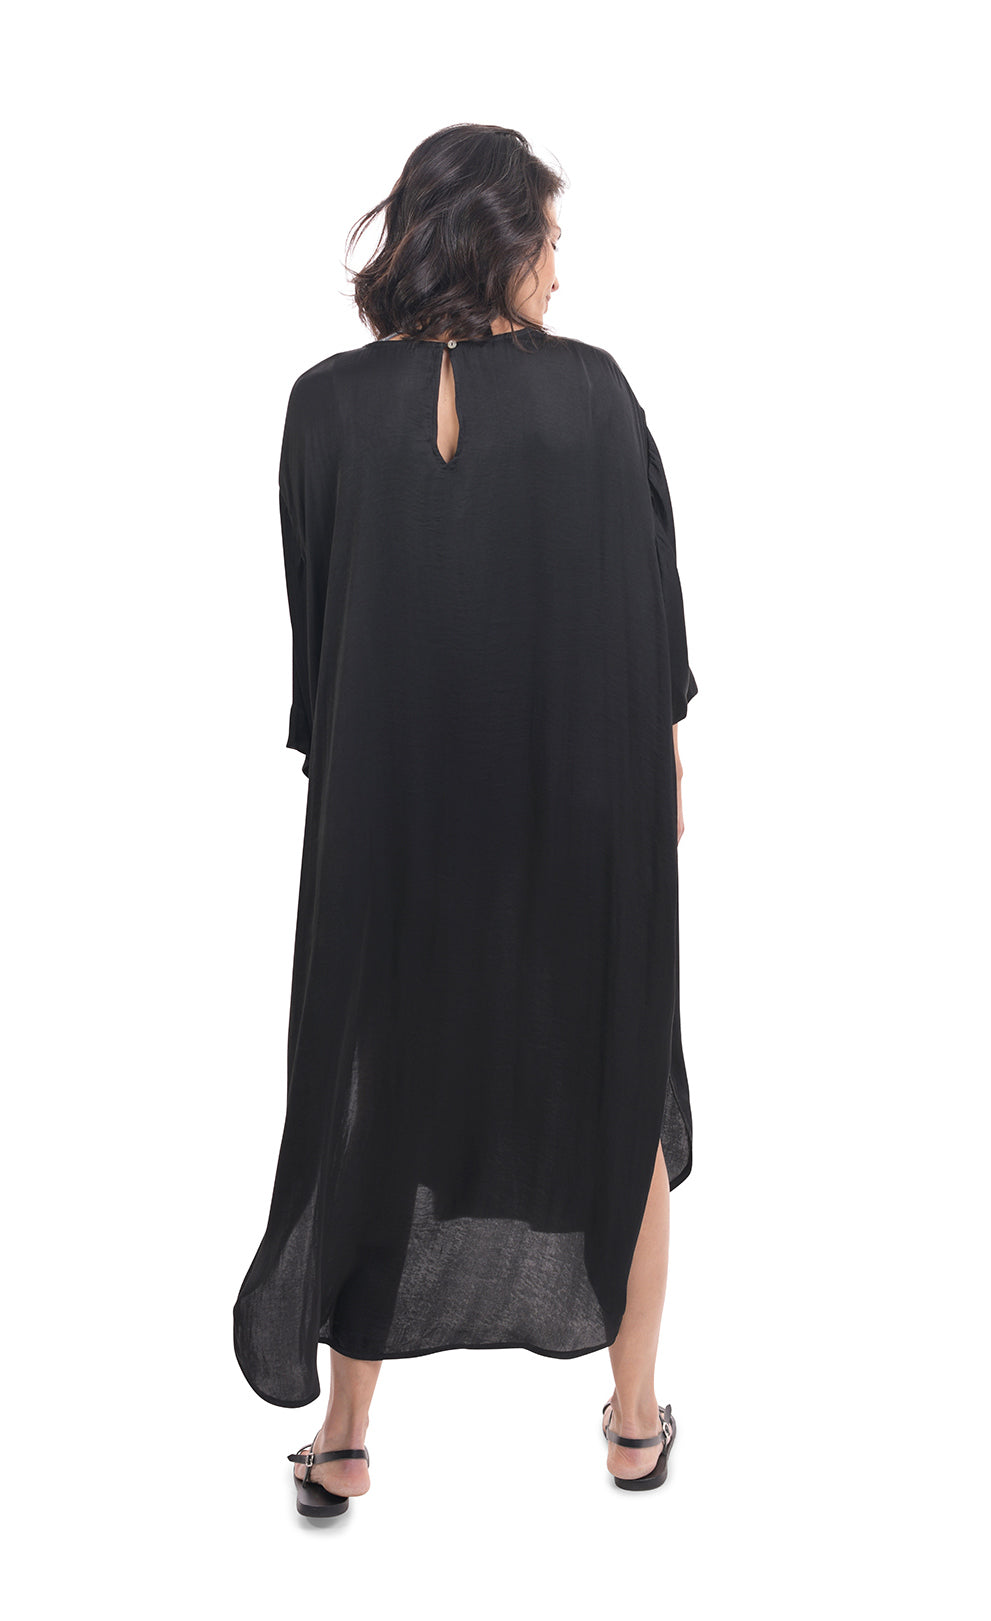 Back full body view of a woman wearing the alembika lotus caftan dress in black. This dress sits below the knees. It has 3/4 length sleeves, side slits, and keyhole back